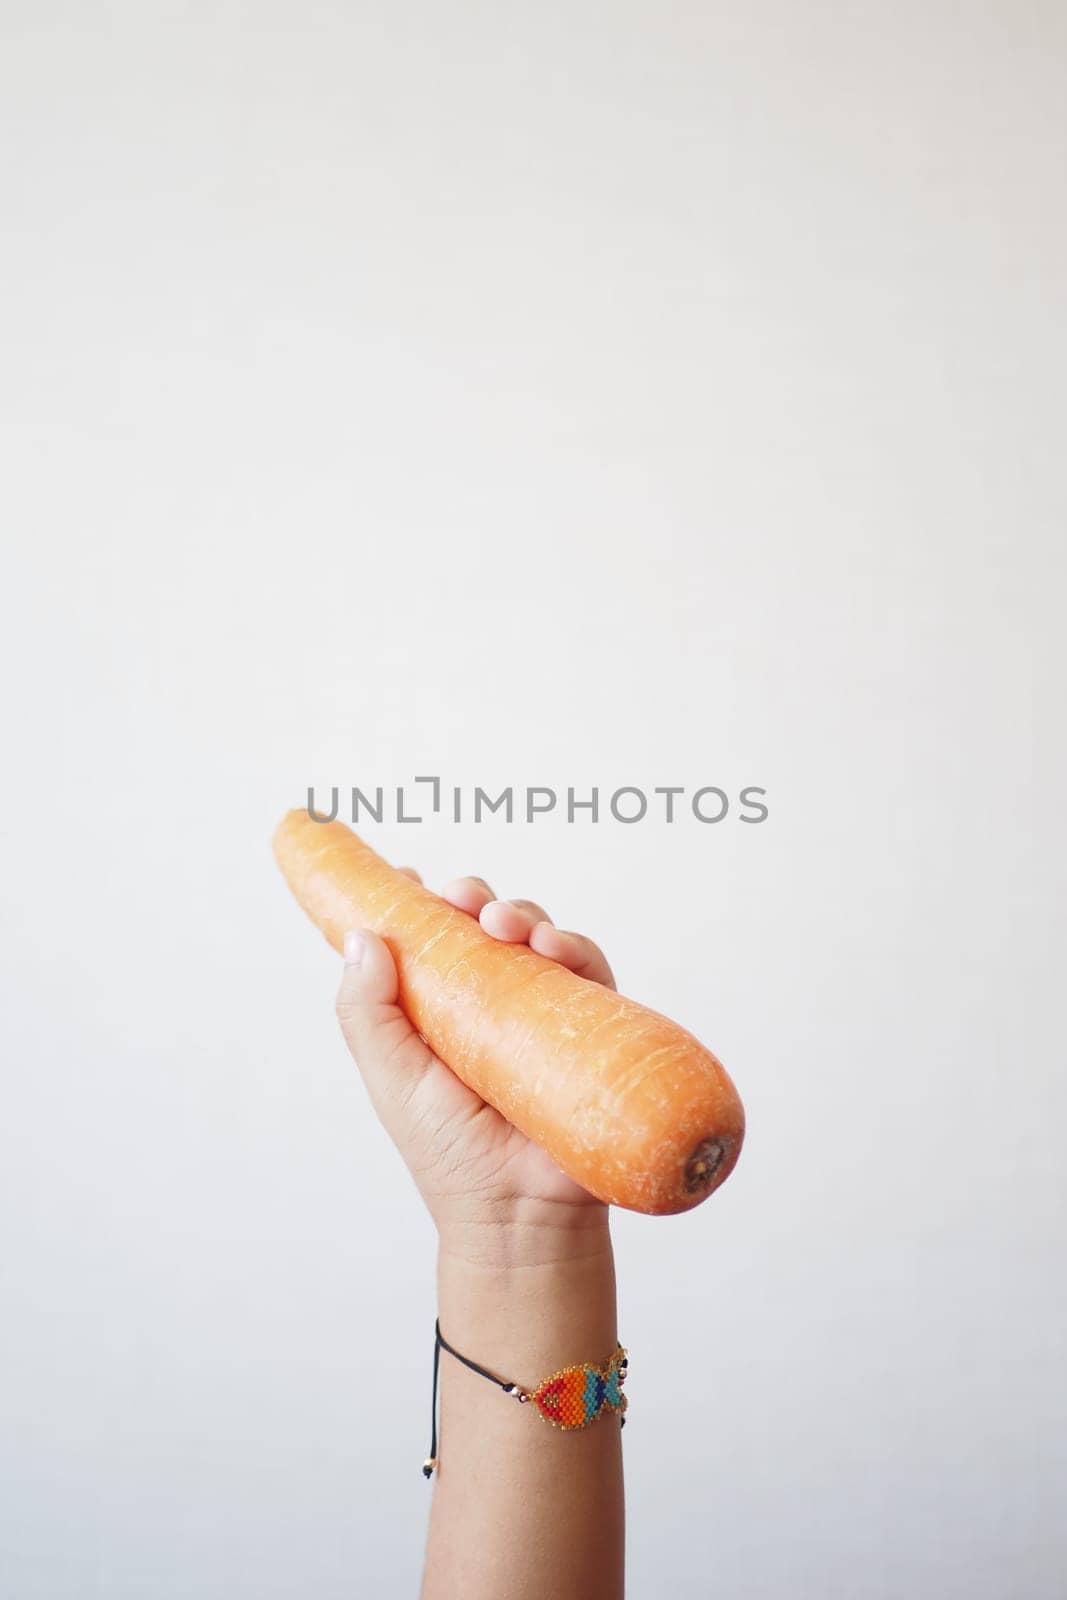 A child is holding a carrot as a food ingredient in their hand by towfiq007